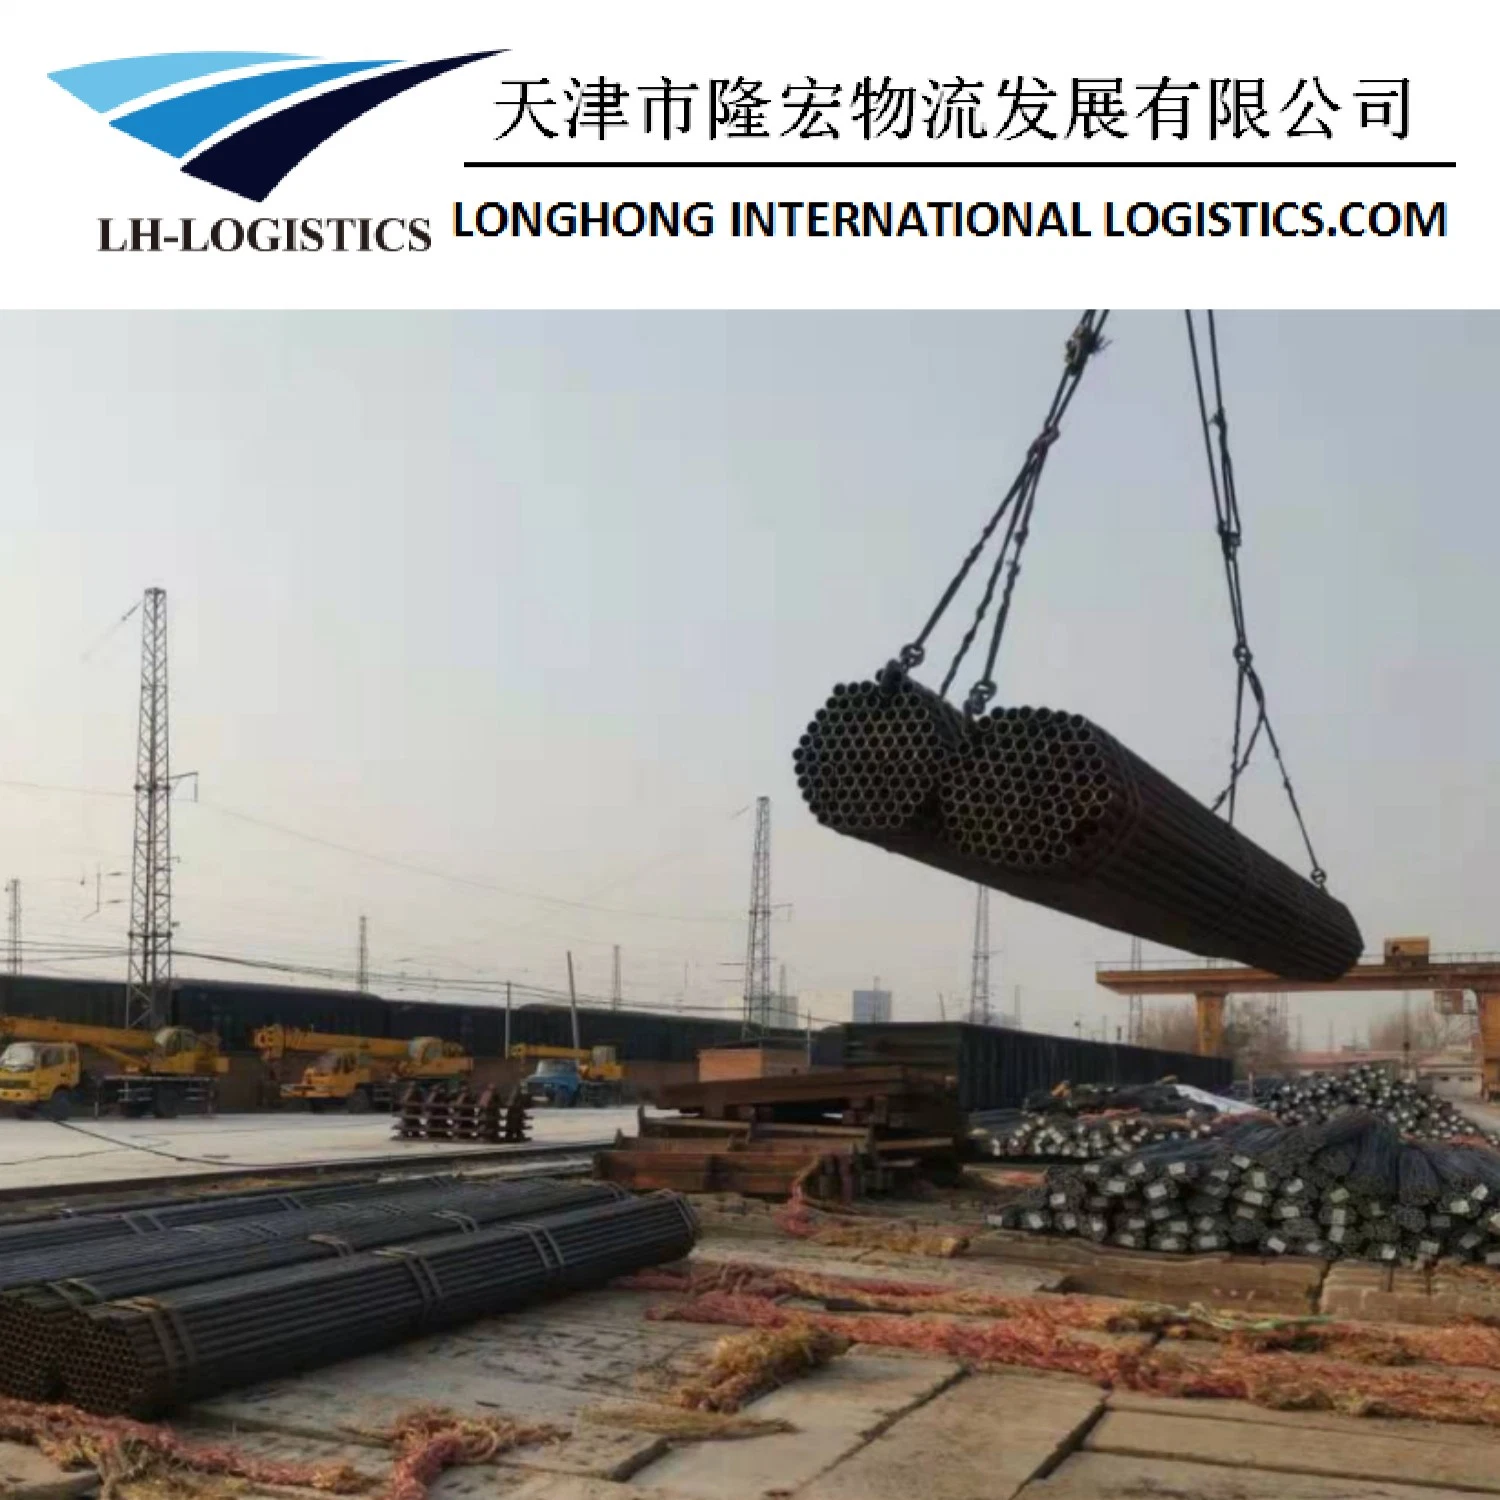 China Logistics Rail Freight Agentsrailway Shipping From China to Central Asia